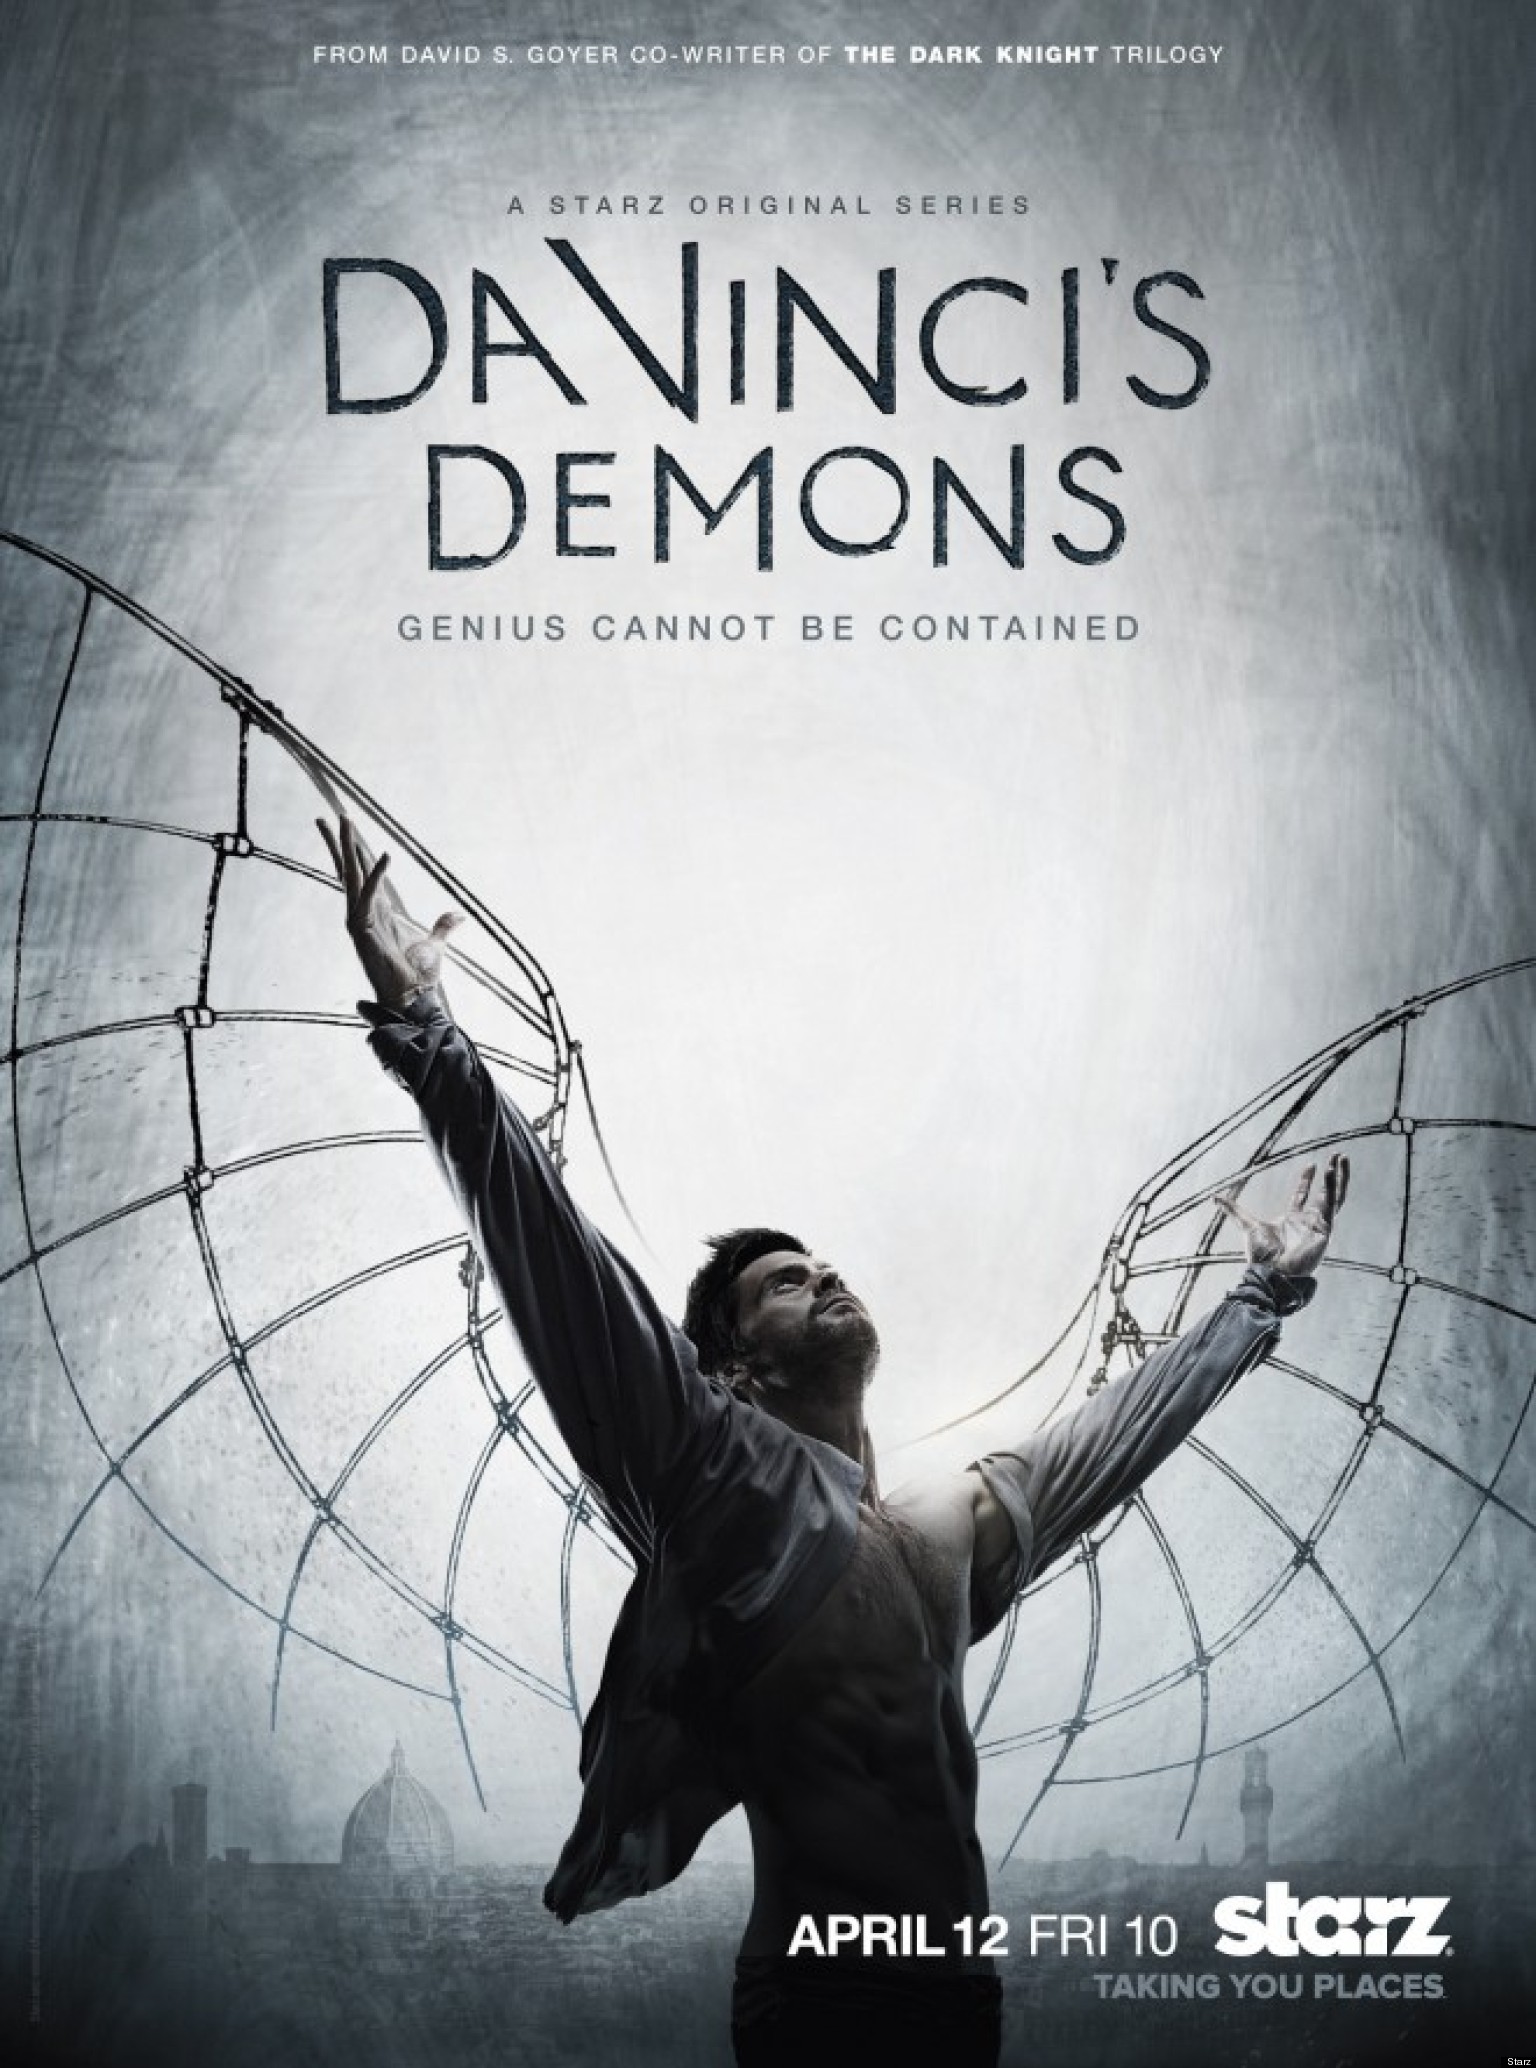 Da Vinci S Demons Television Series Gets Us Amped With Epic Poster Art And Trailer PHOTO